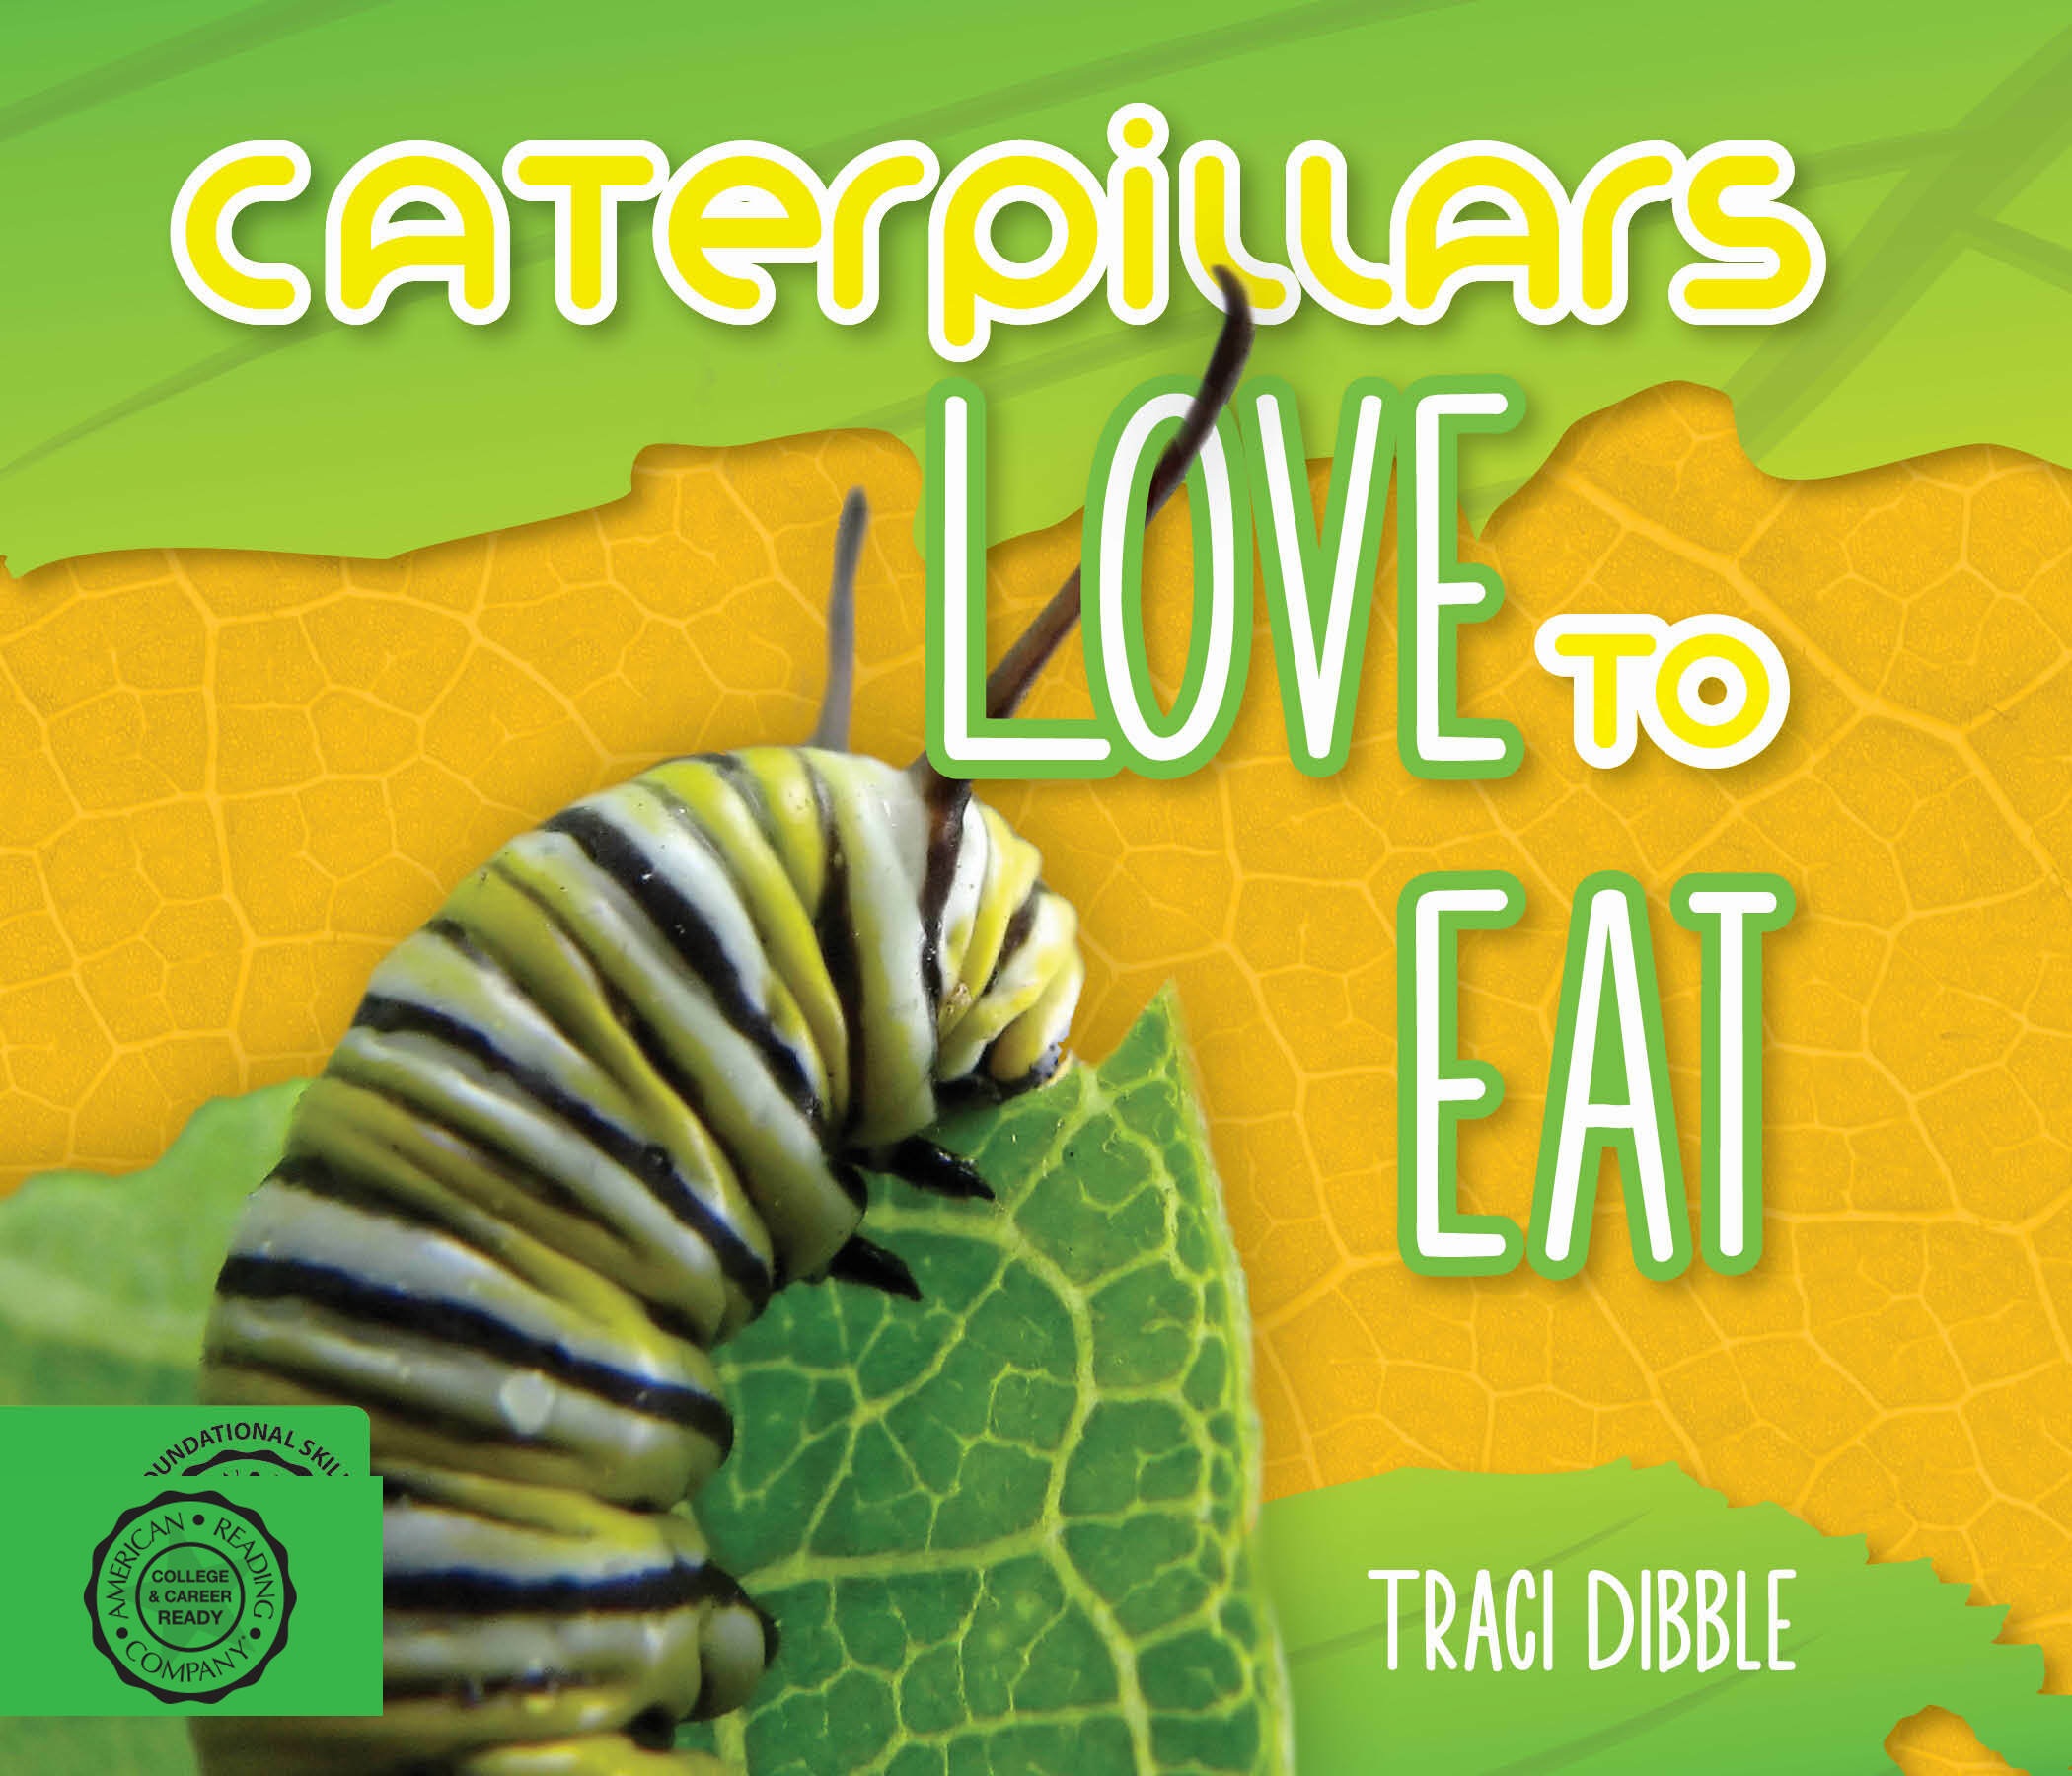 Caterpillars Love to Eat by Traci Dibble (9781634376365)